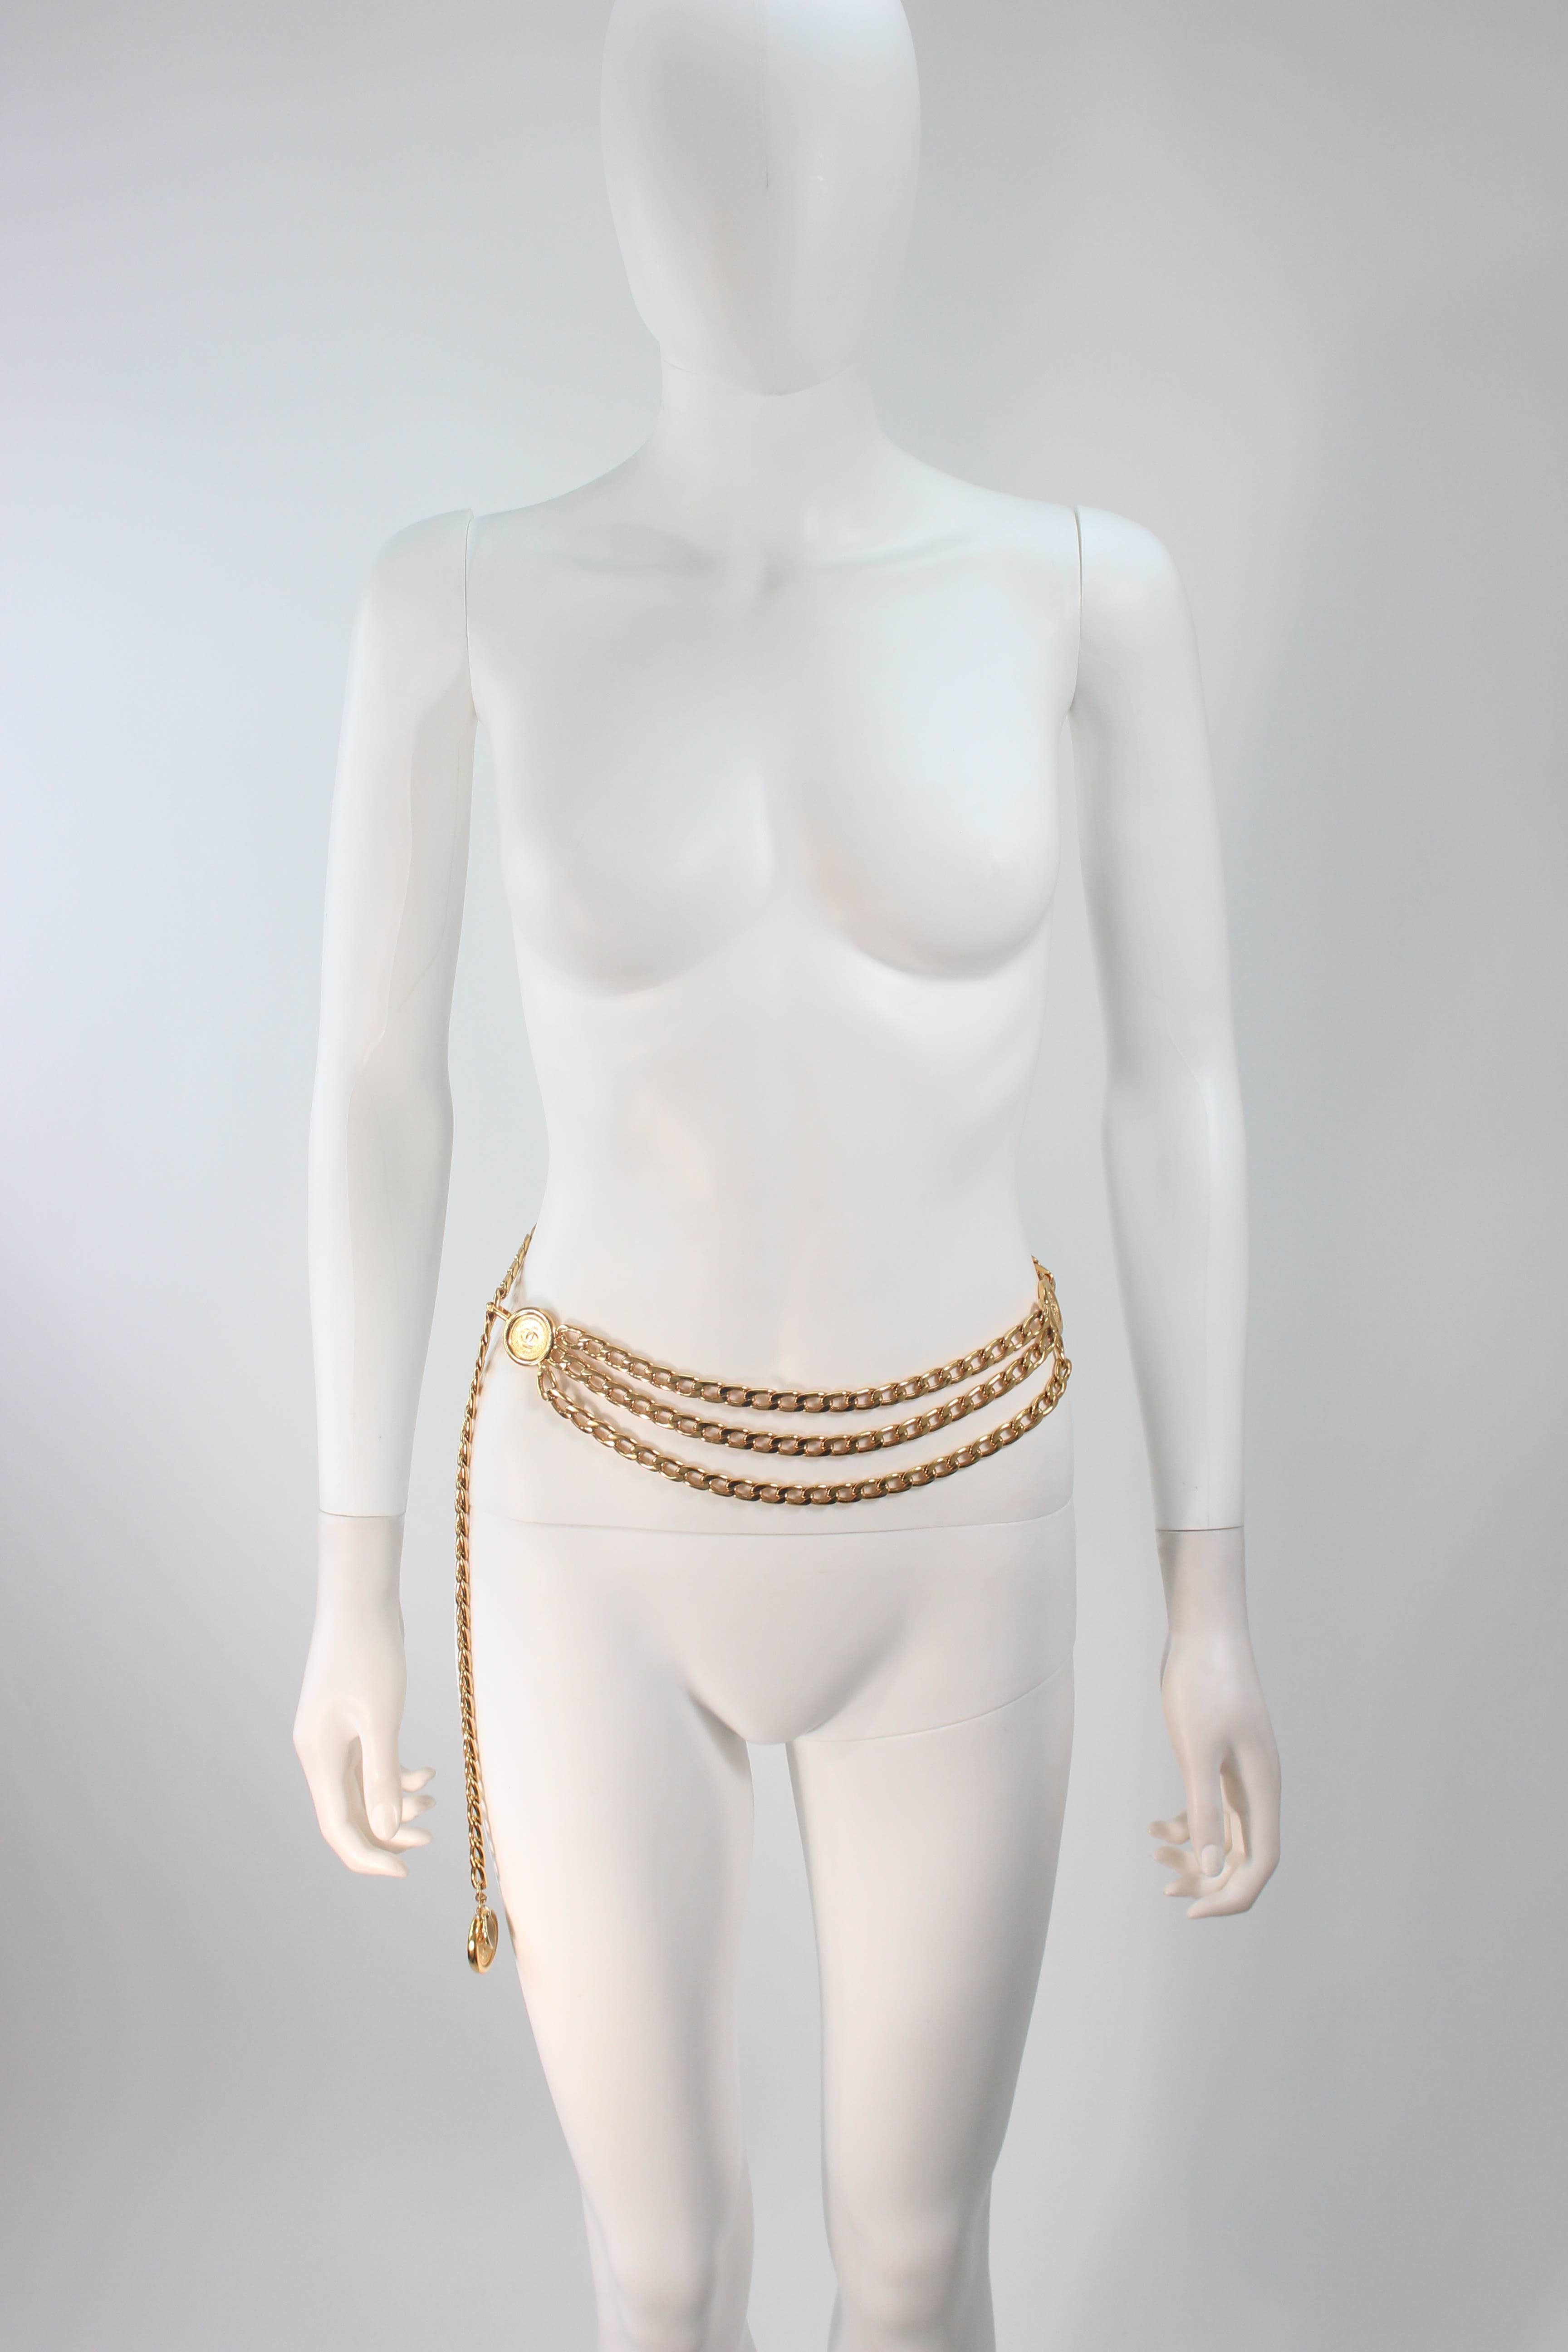 This Chanel design is available for viewing at our Beverly Hills Boutique. We offer a large selection of evening gowns and luxury garments. 

 This belt is constructed of a gold hue metal and features a three strand detail with Chanel logos. In